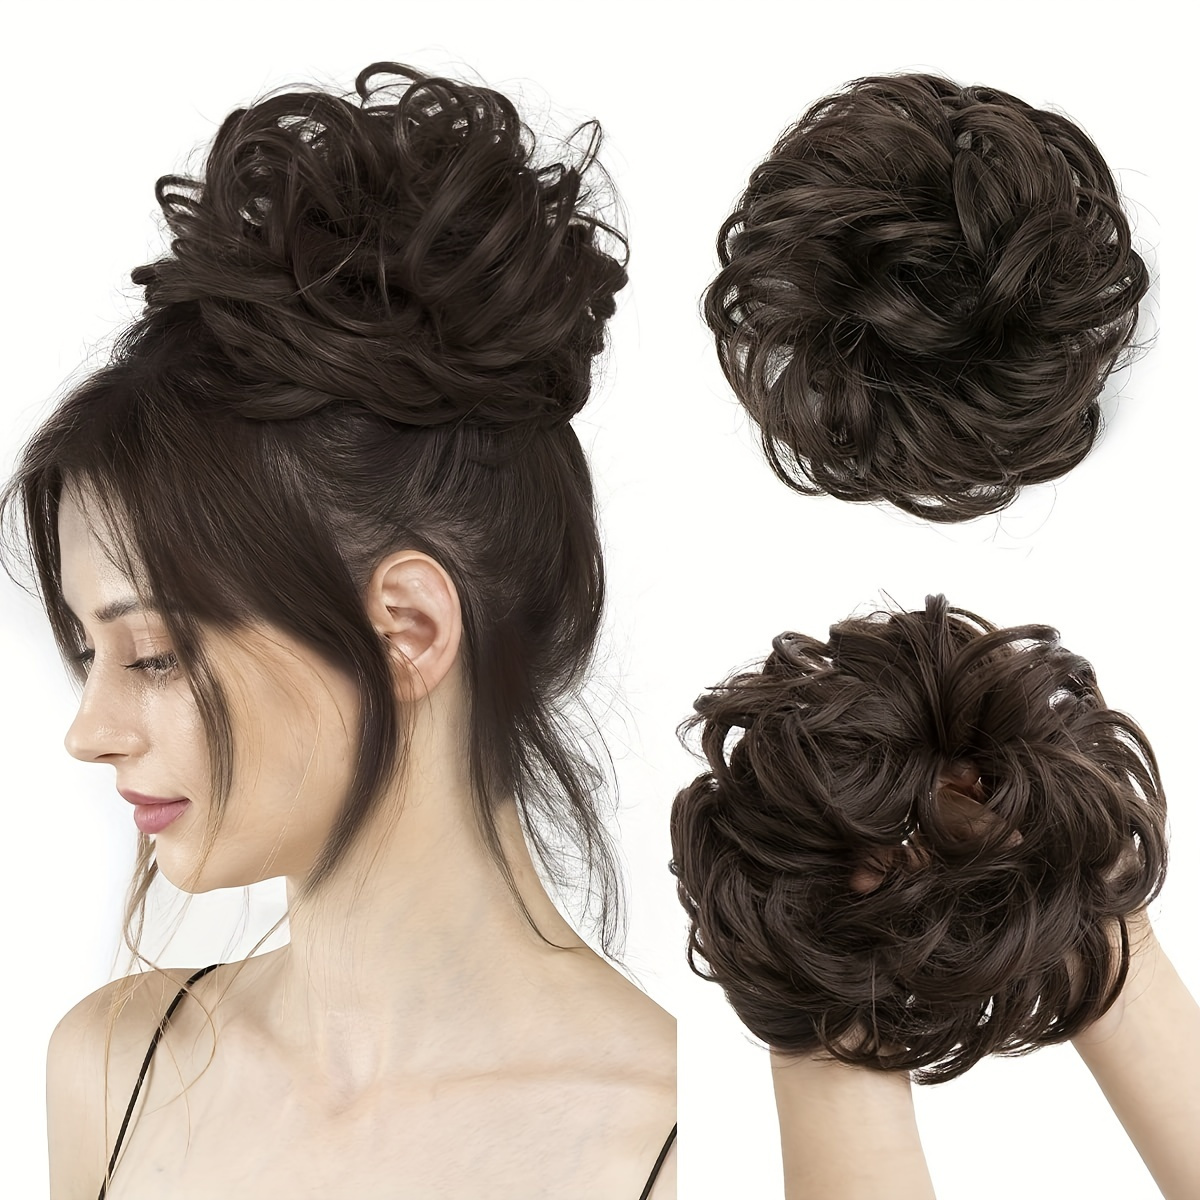 

1pc Messy Bun Hair Piece Wavy Curly Scrunchies Synthetic Black Ponytail Hair Extensions Thick Updo Hairpieces For Women Hair Accessories